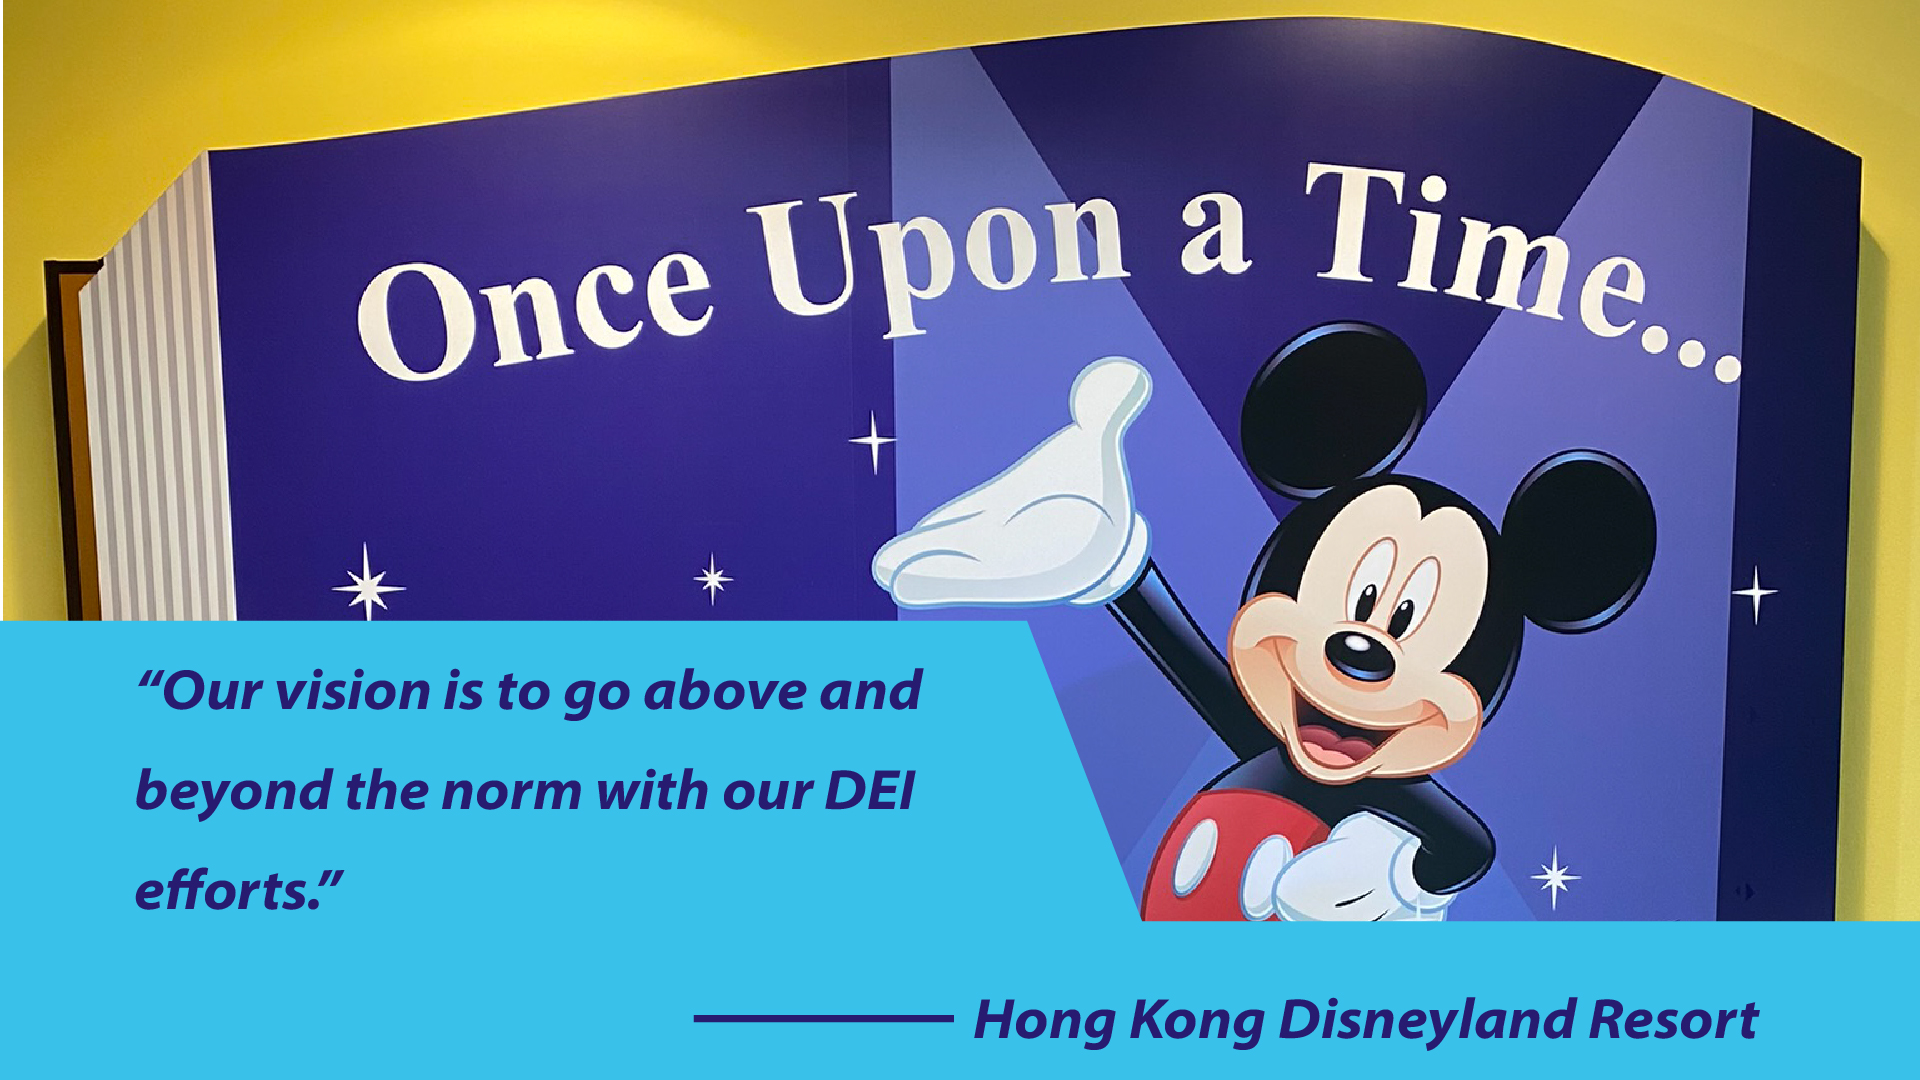 Hong åKong Disneyland Resort: Our vision is to go above and beyond the norm with our DEI efforts.